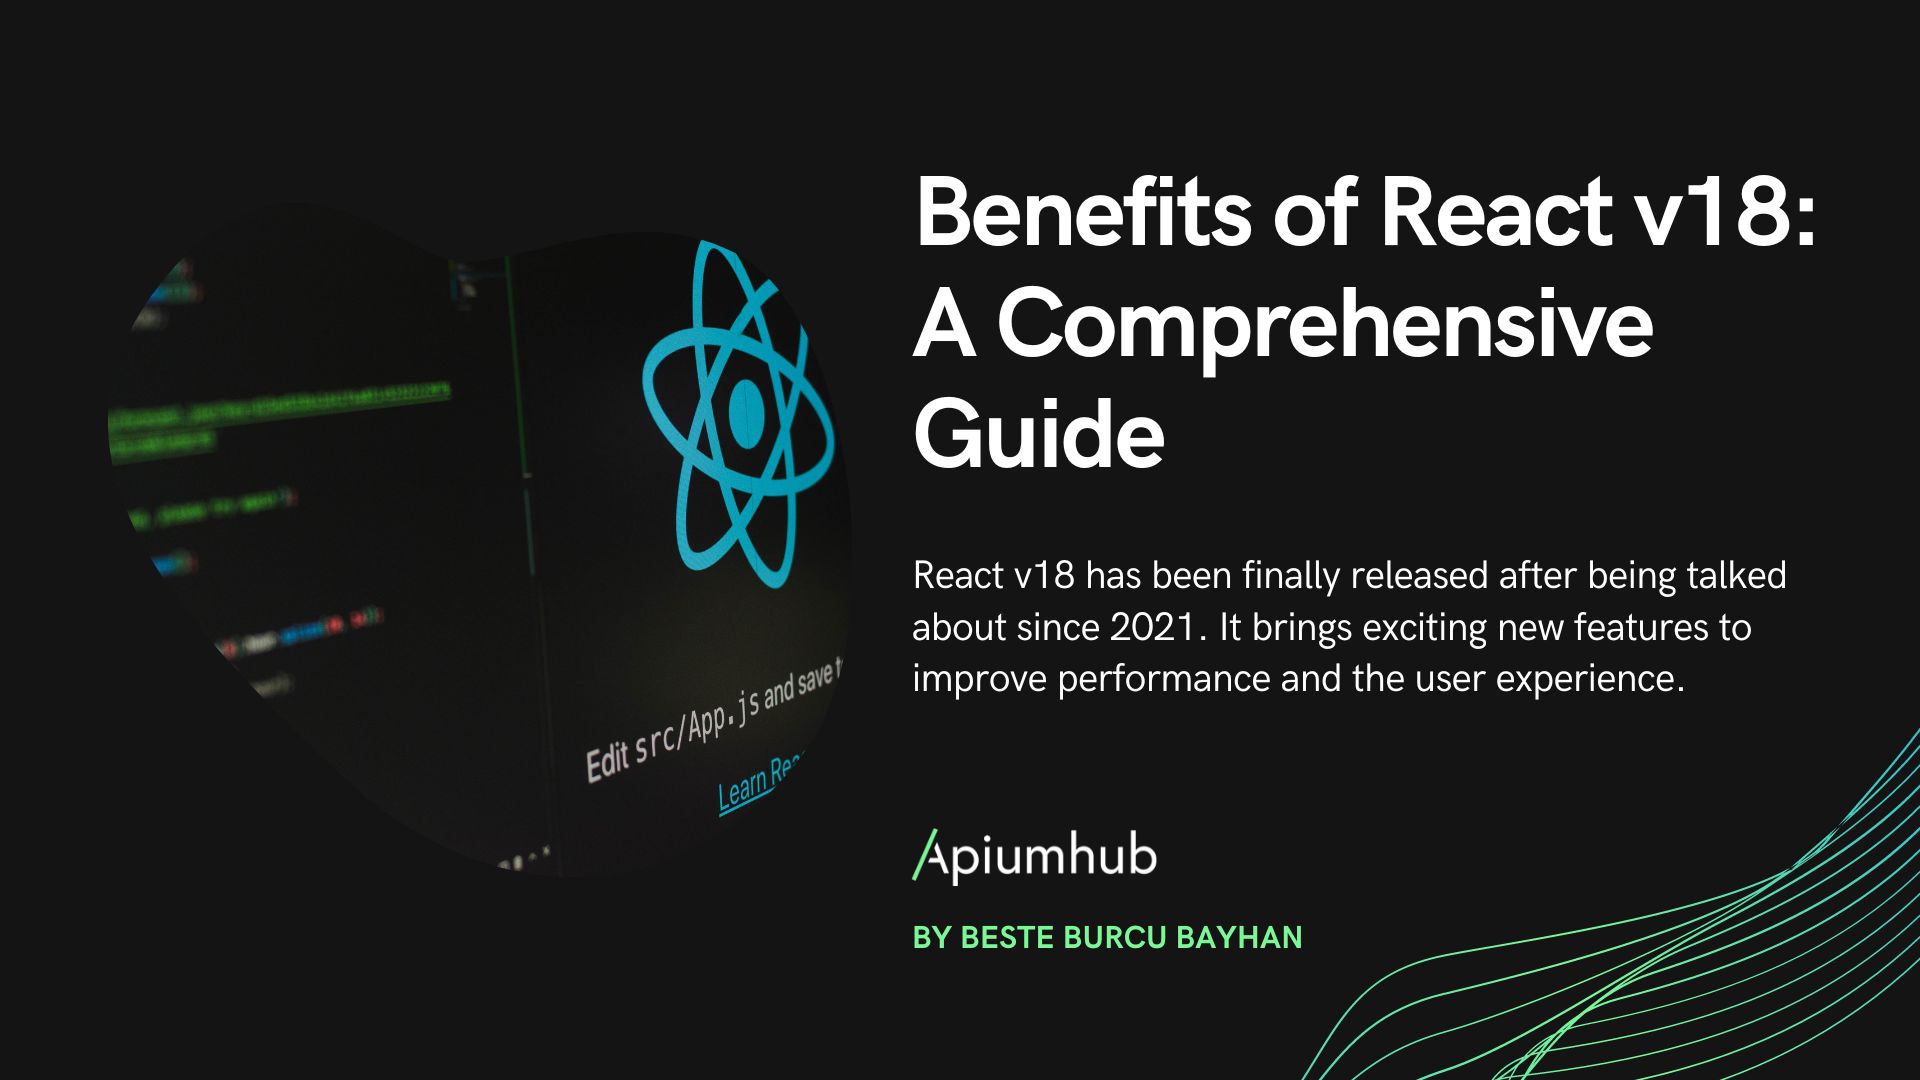 Benefits of React 18: a comprehensive guide